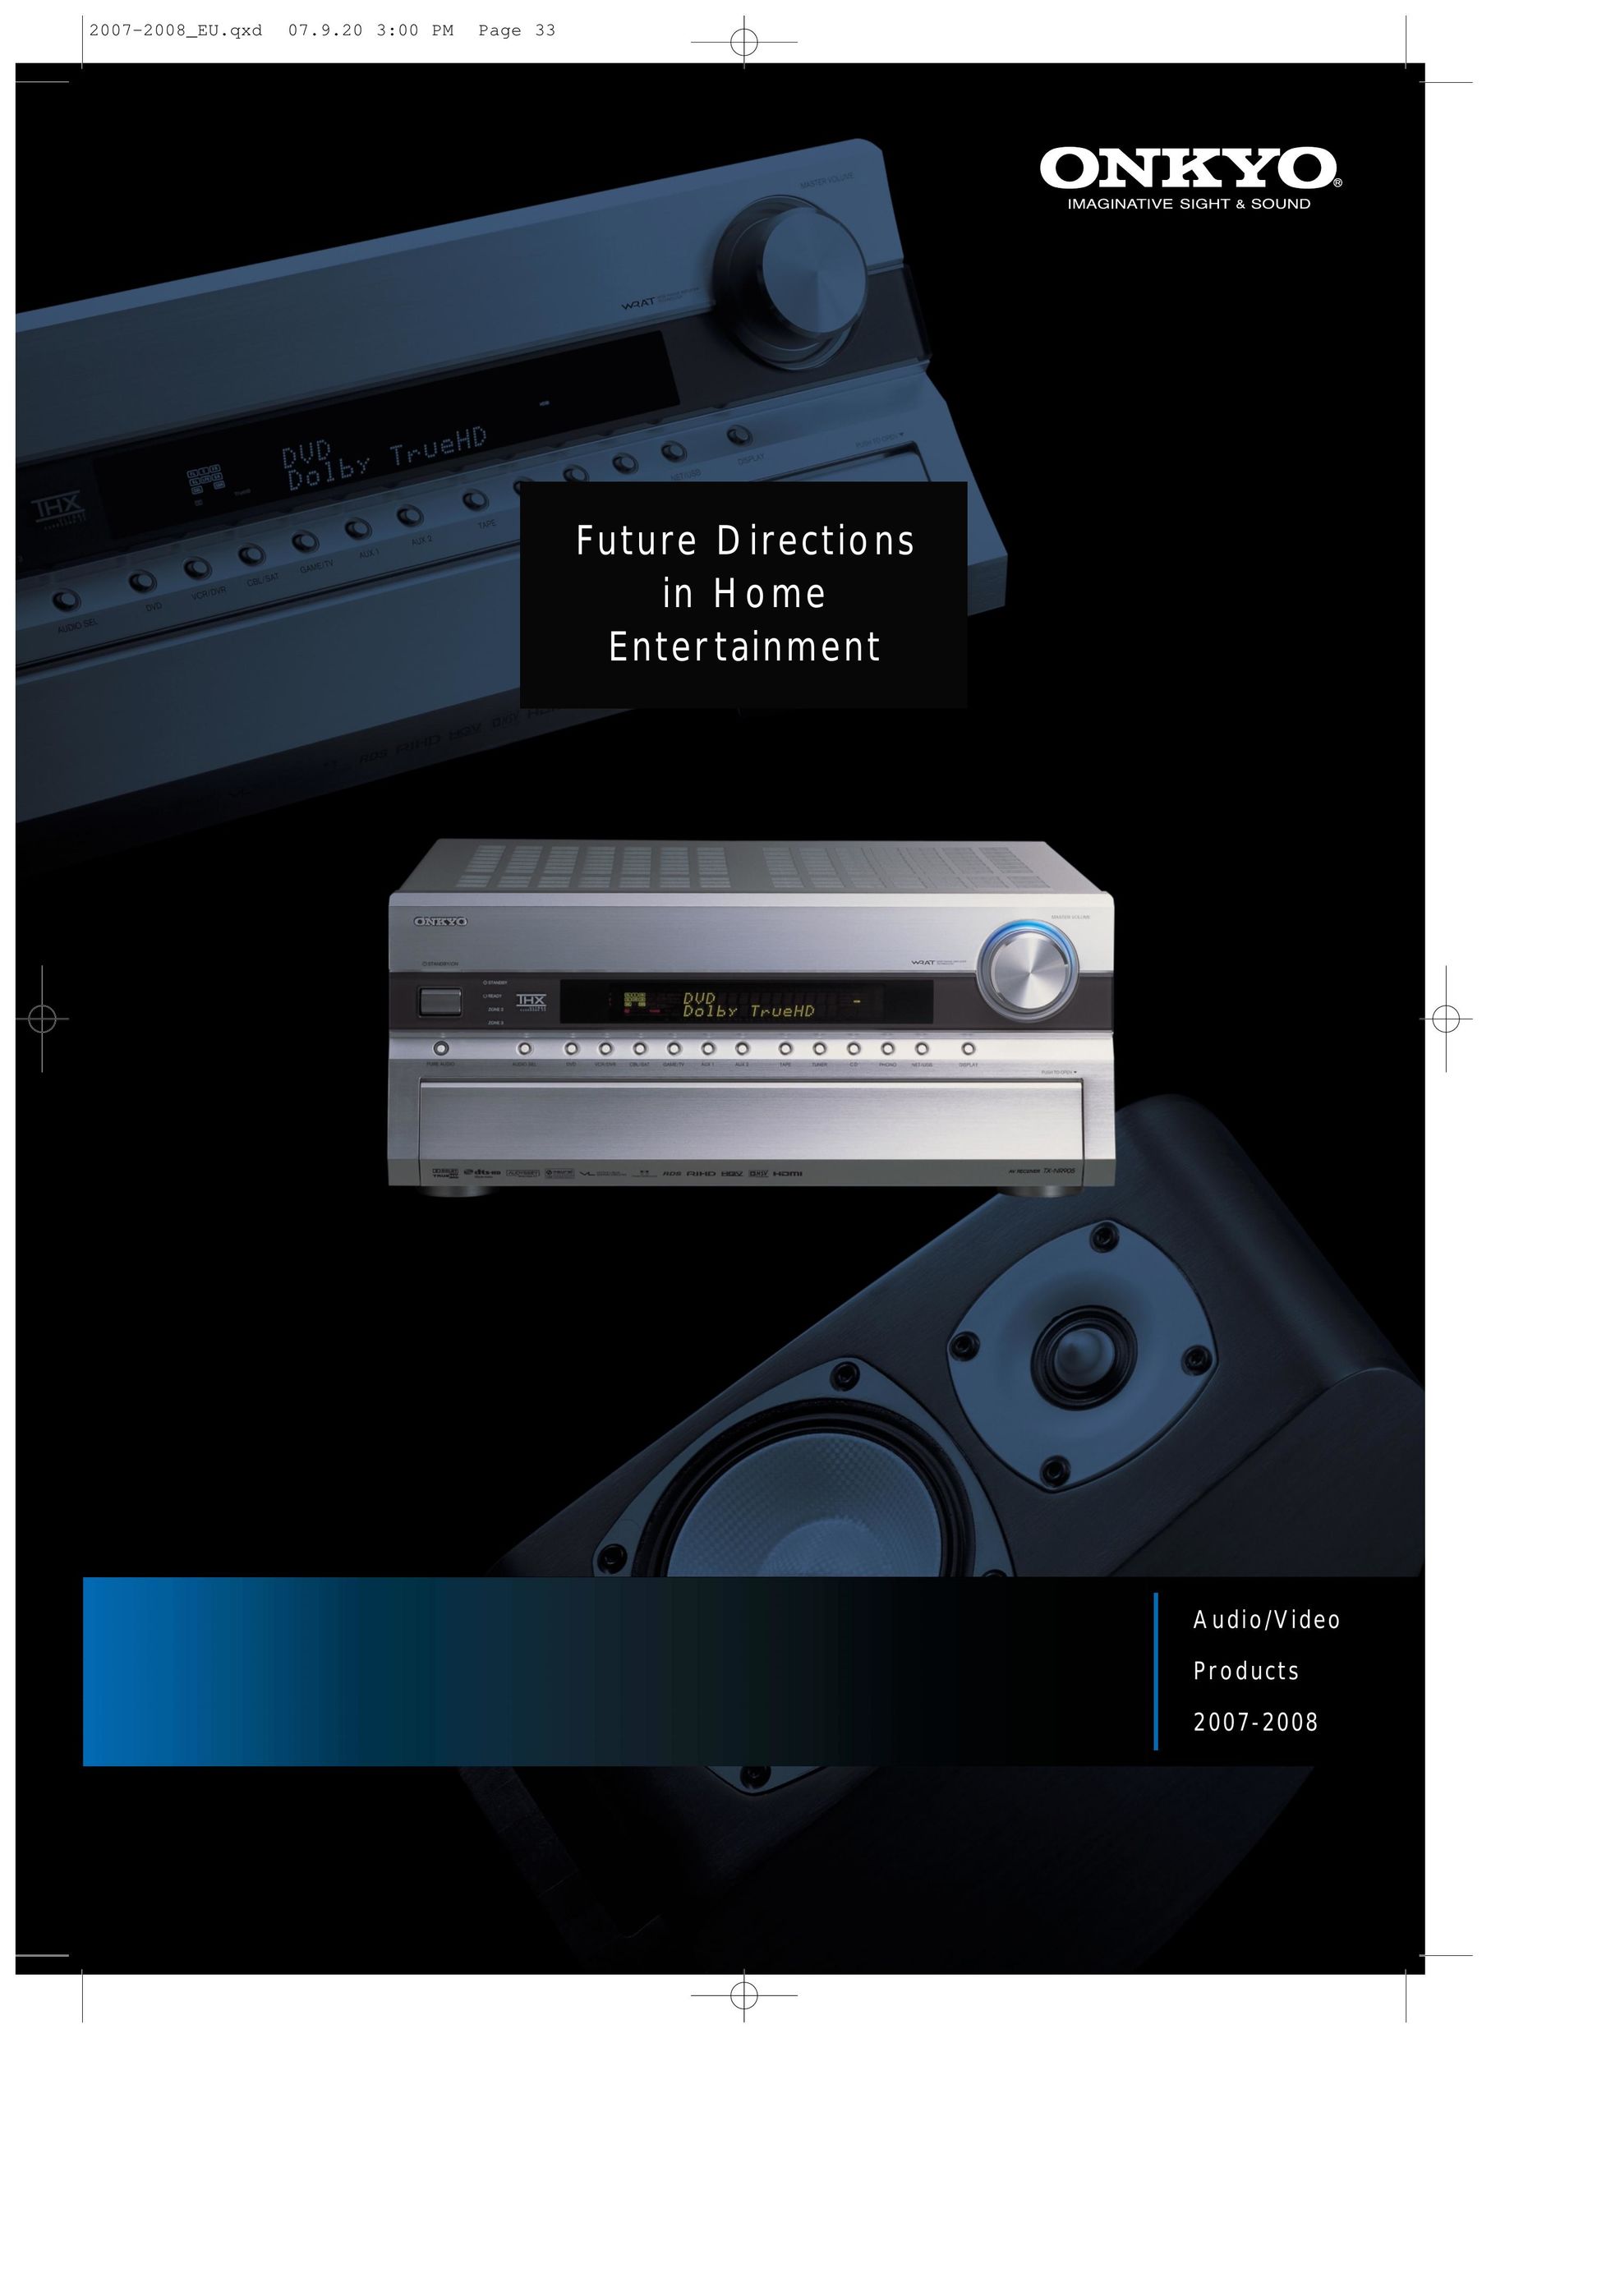 Onkyo Home Entertainment System Home Theater System User Manual